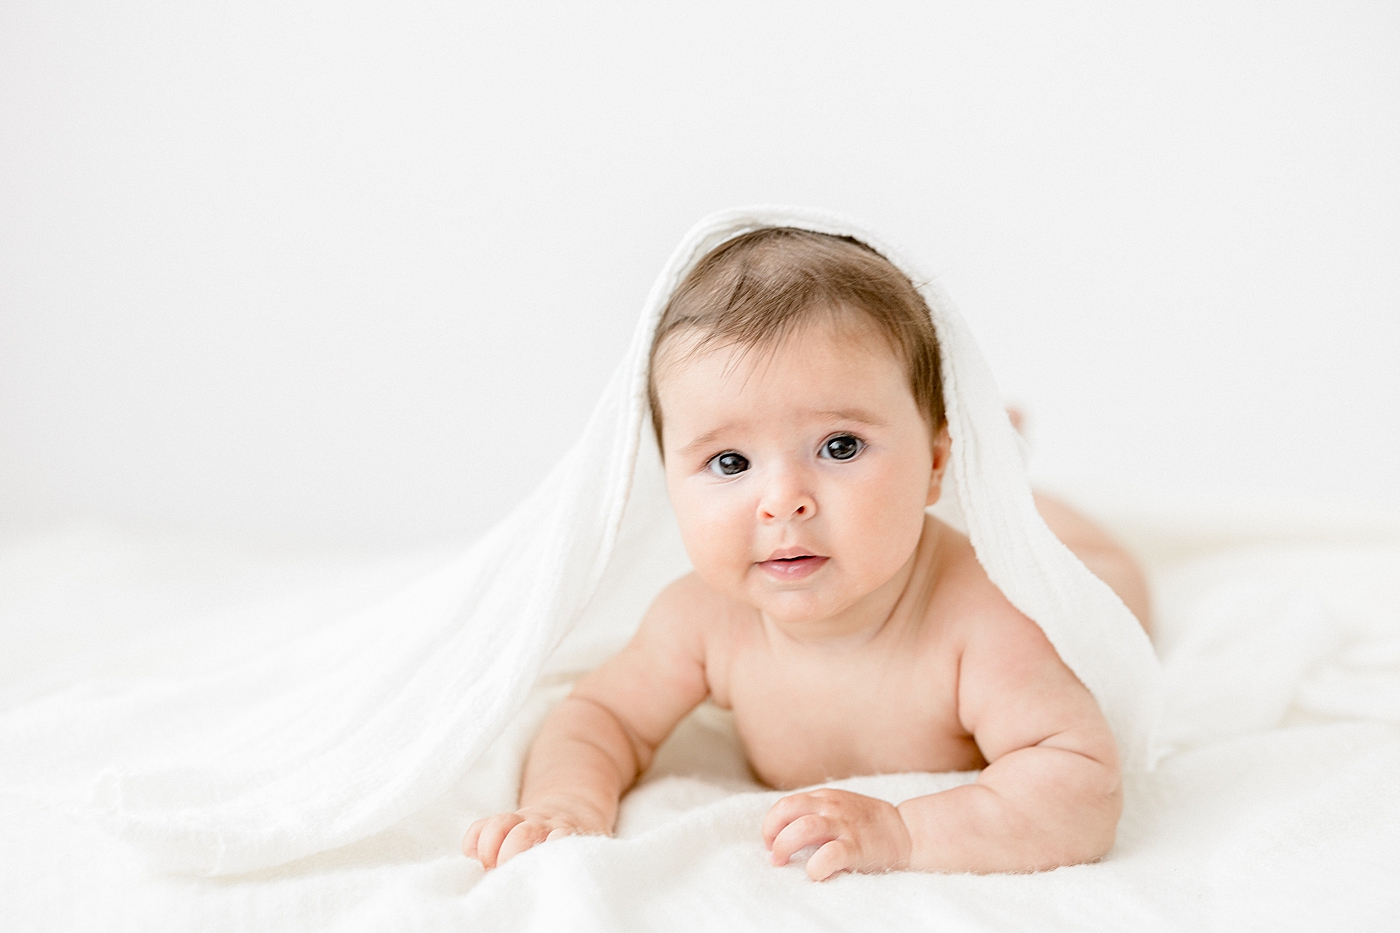 Documenting your baby's milestones - six months. Photos by Brittany Elise Photography.